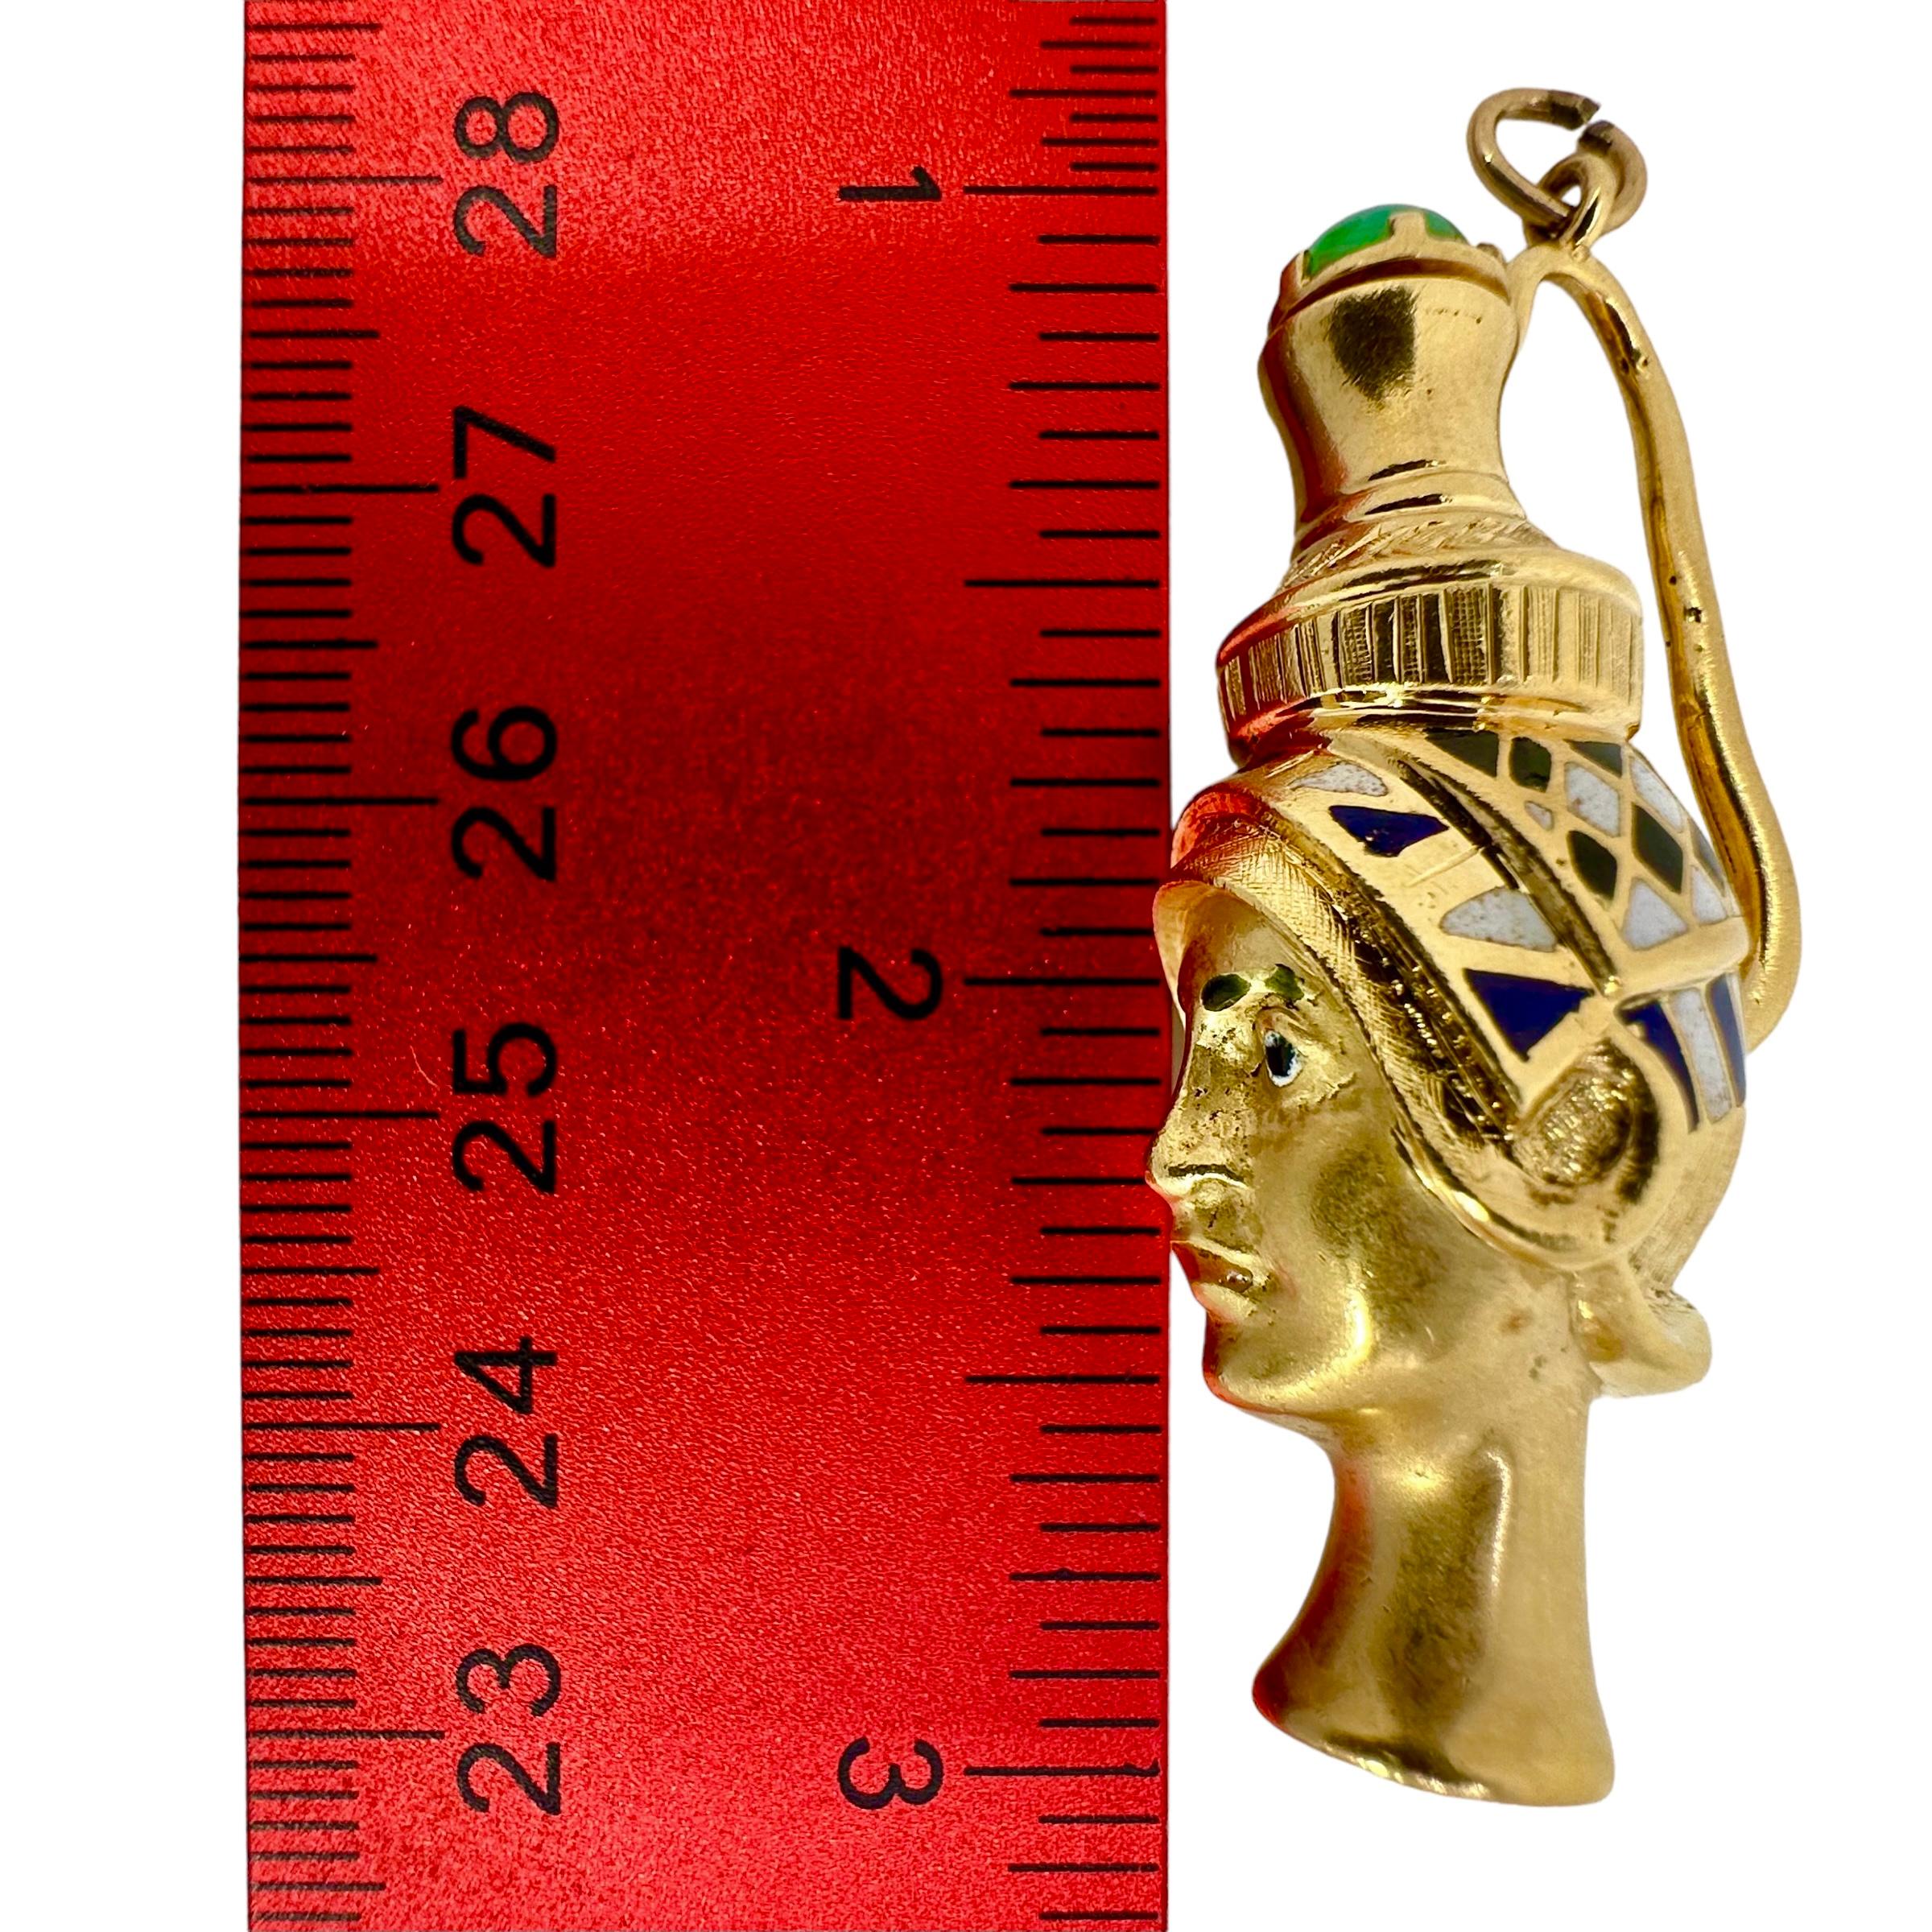 Positively Unique Vintage Gold Italian Vintage Egyptian Themed Perfume Amulet For Sale 4